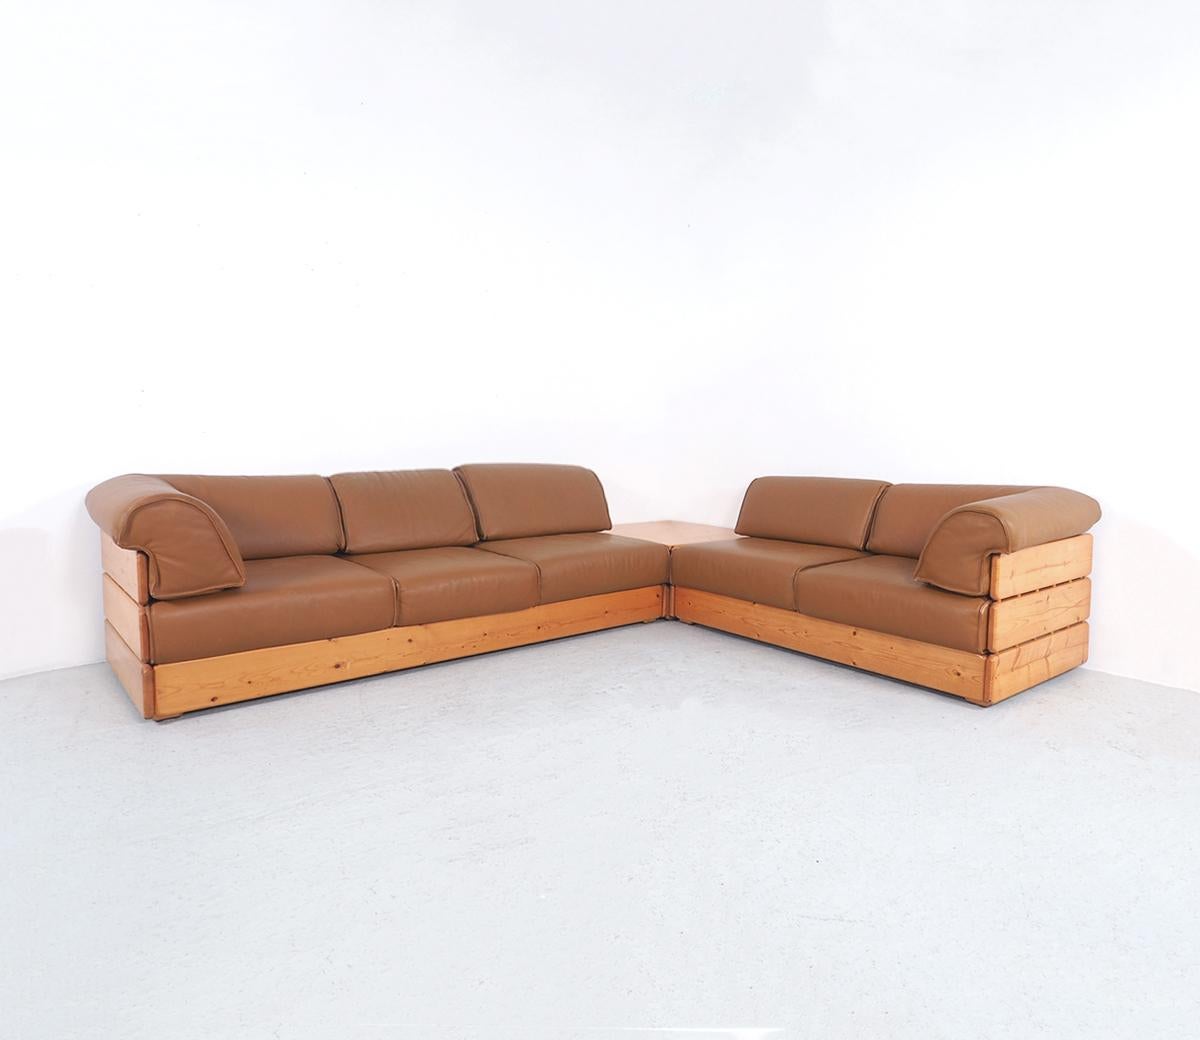 Lovely lounge corner sofa in pinewood with loose leather cushions made in the 1970s.

The set consists of a 3-seater and a 2-seater with a corner or coffee table.

In the style of Ate van Apeldoorn.

The sofa has a frame of pinewood planks